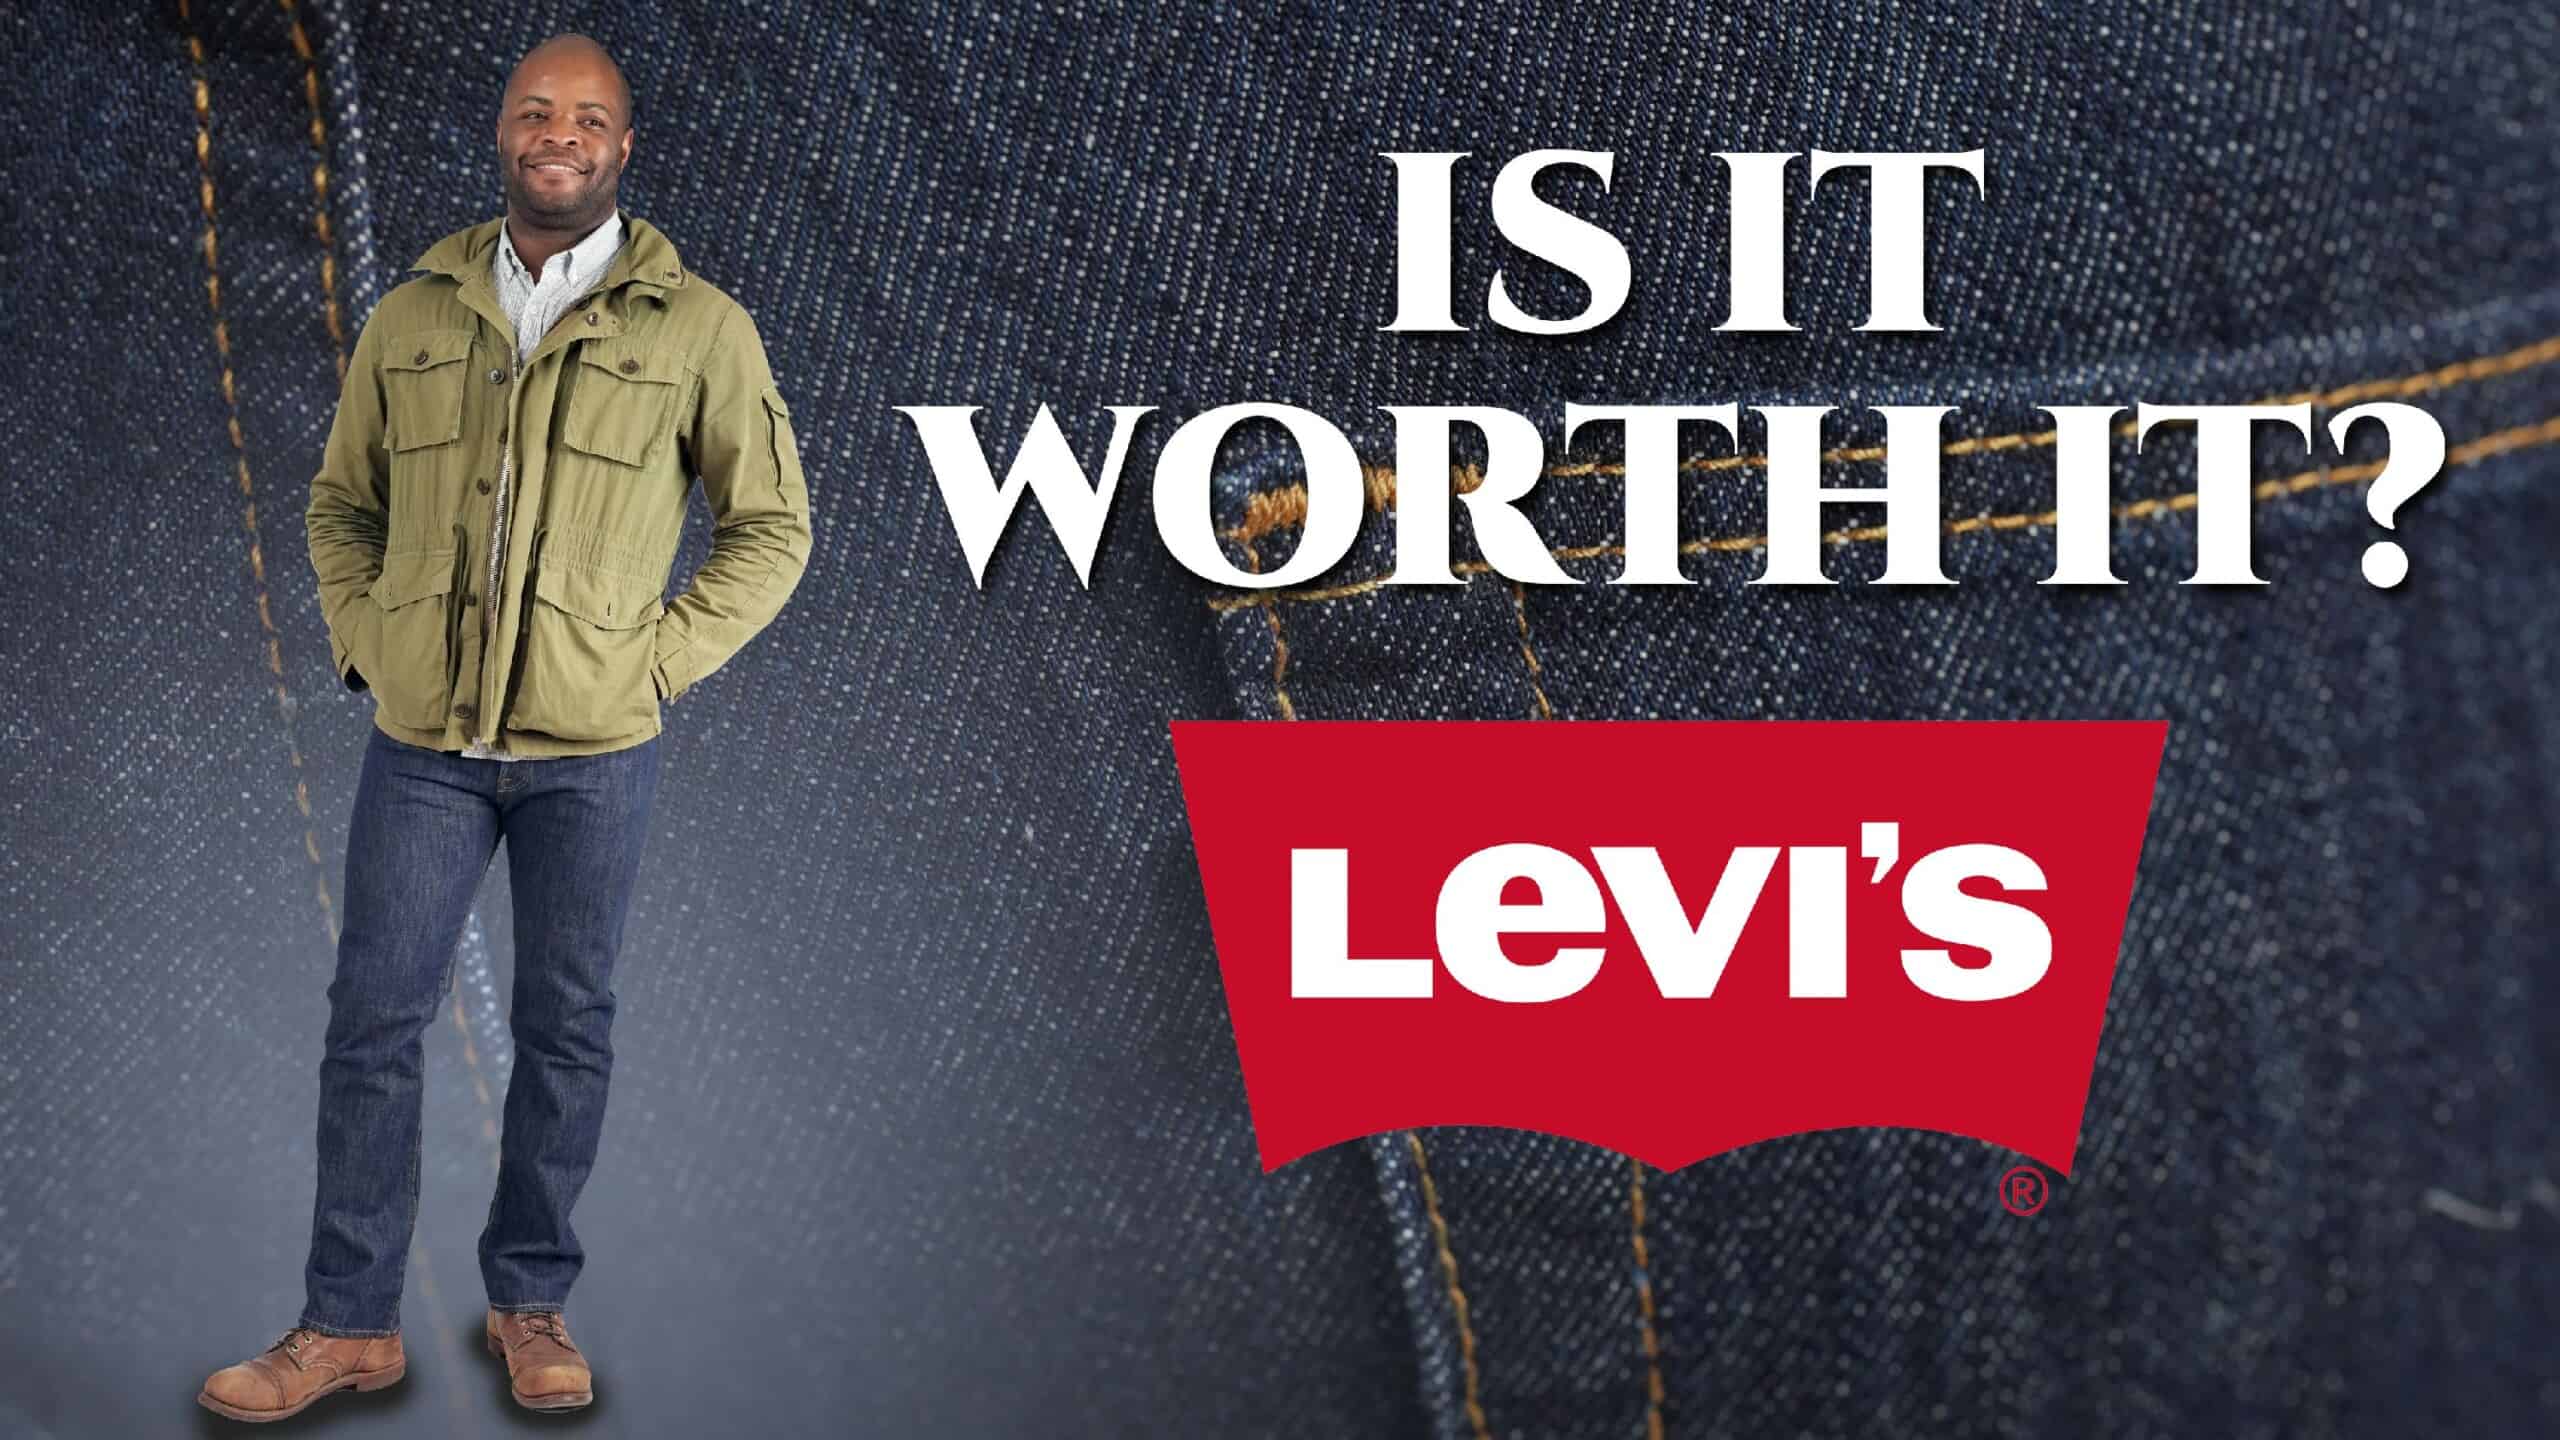 Levis red not tag? do levis some why say the on Seeing Red